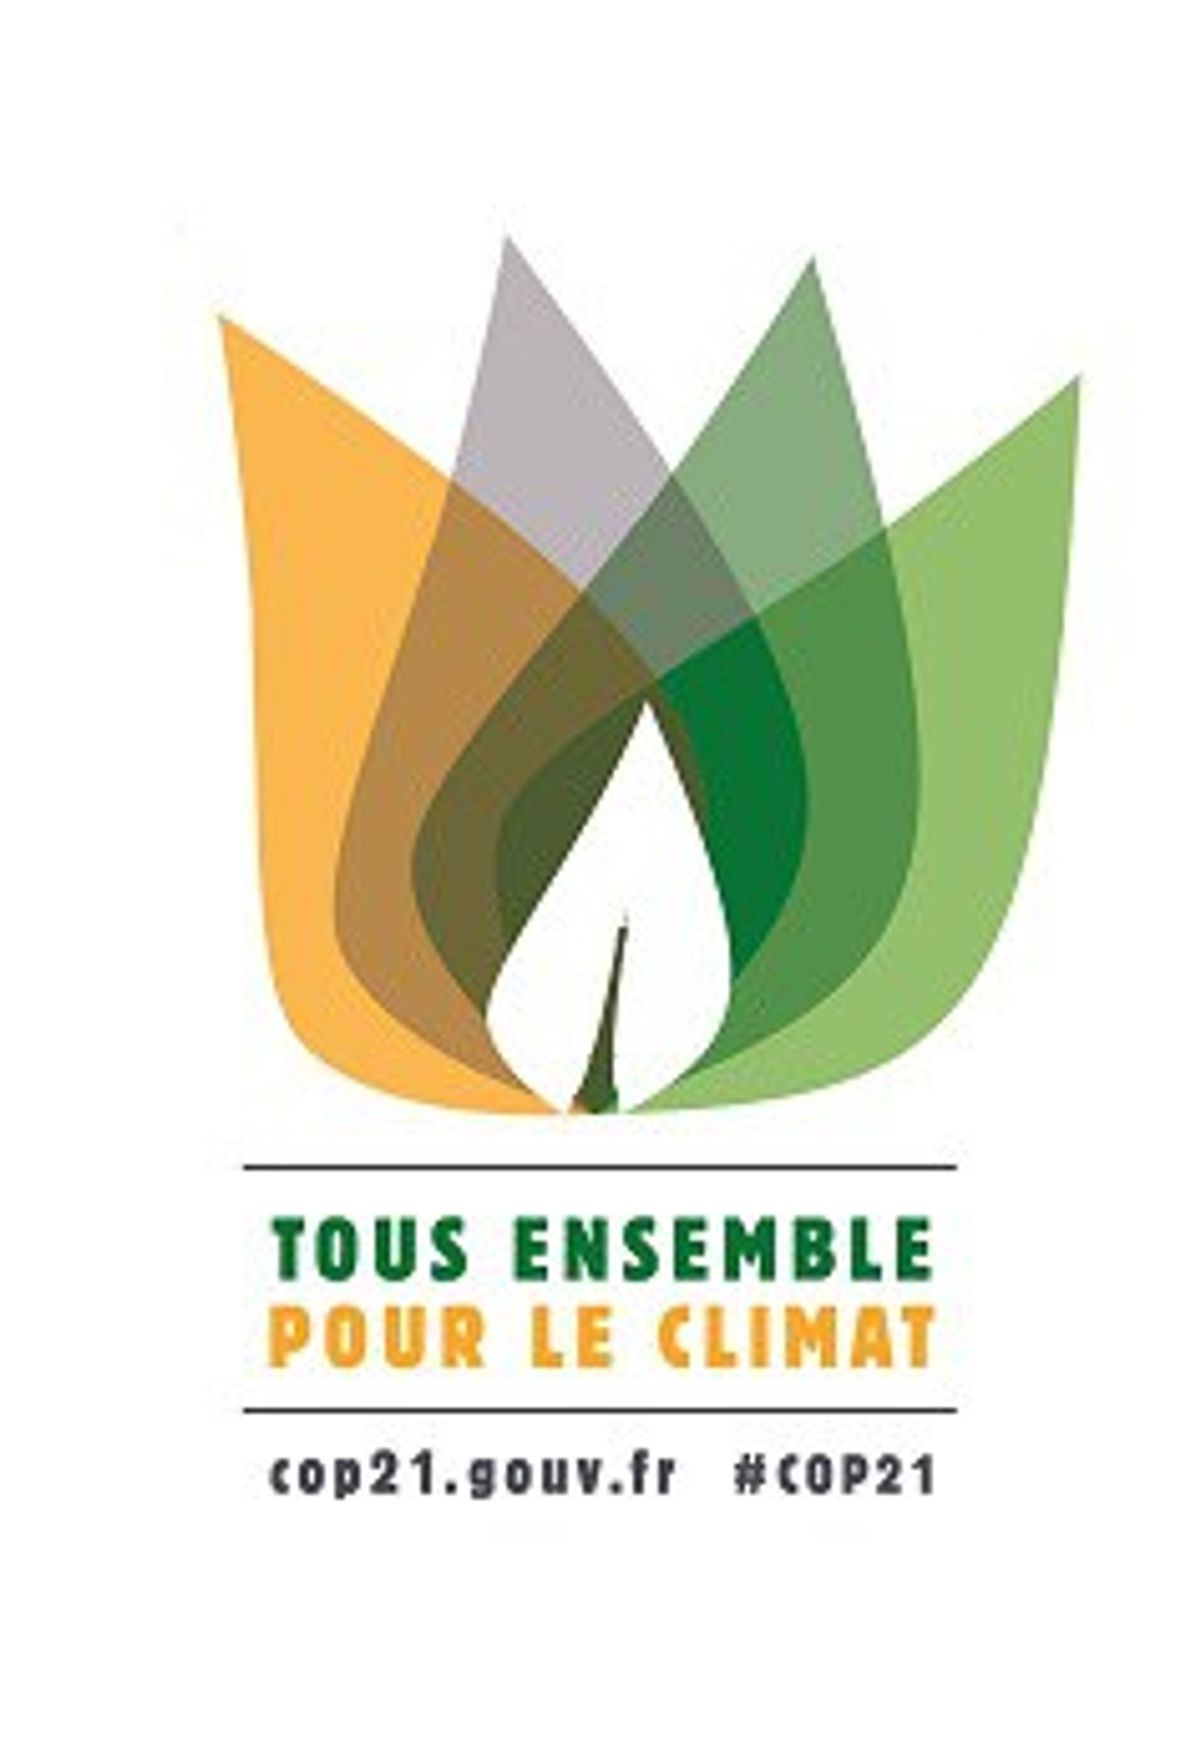 COP21, Me, and You